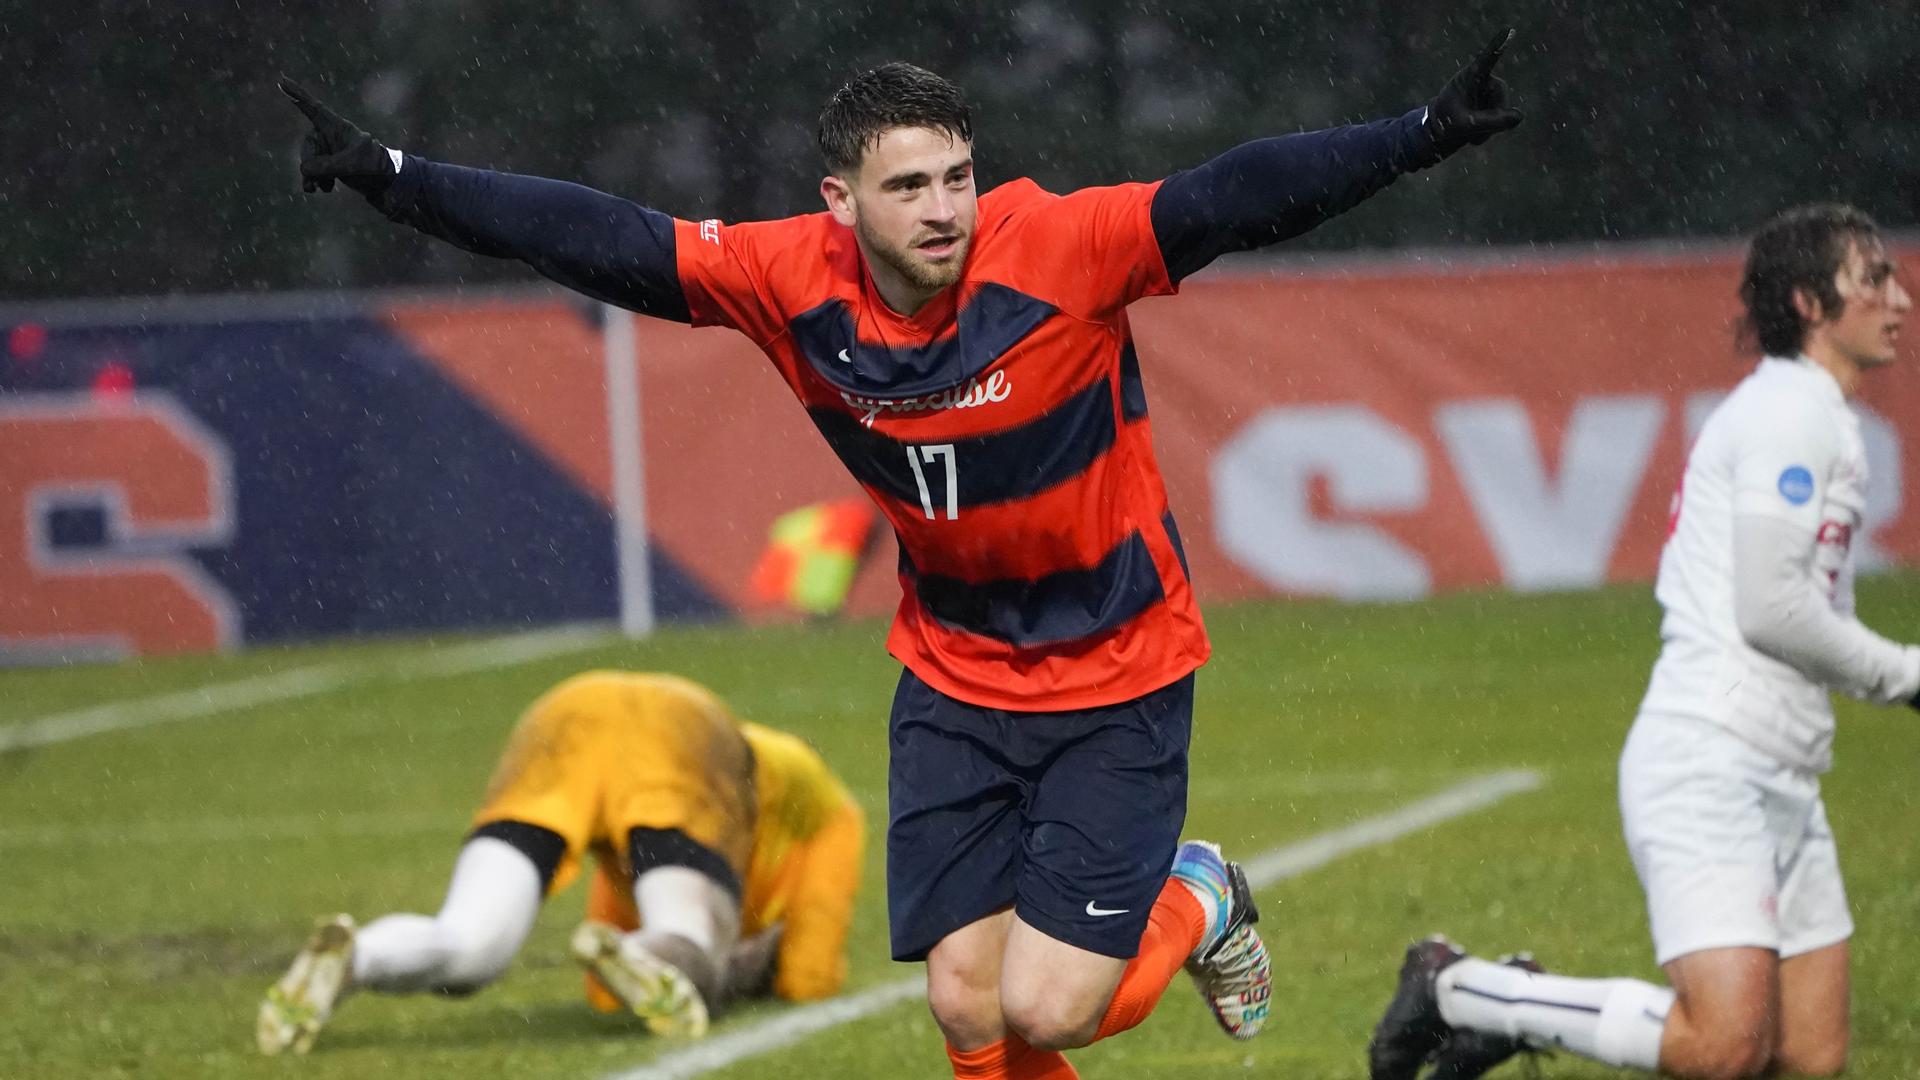 Syracuse men’s soccer advances to Elite Eight with shutout win over Cornell